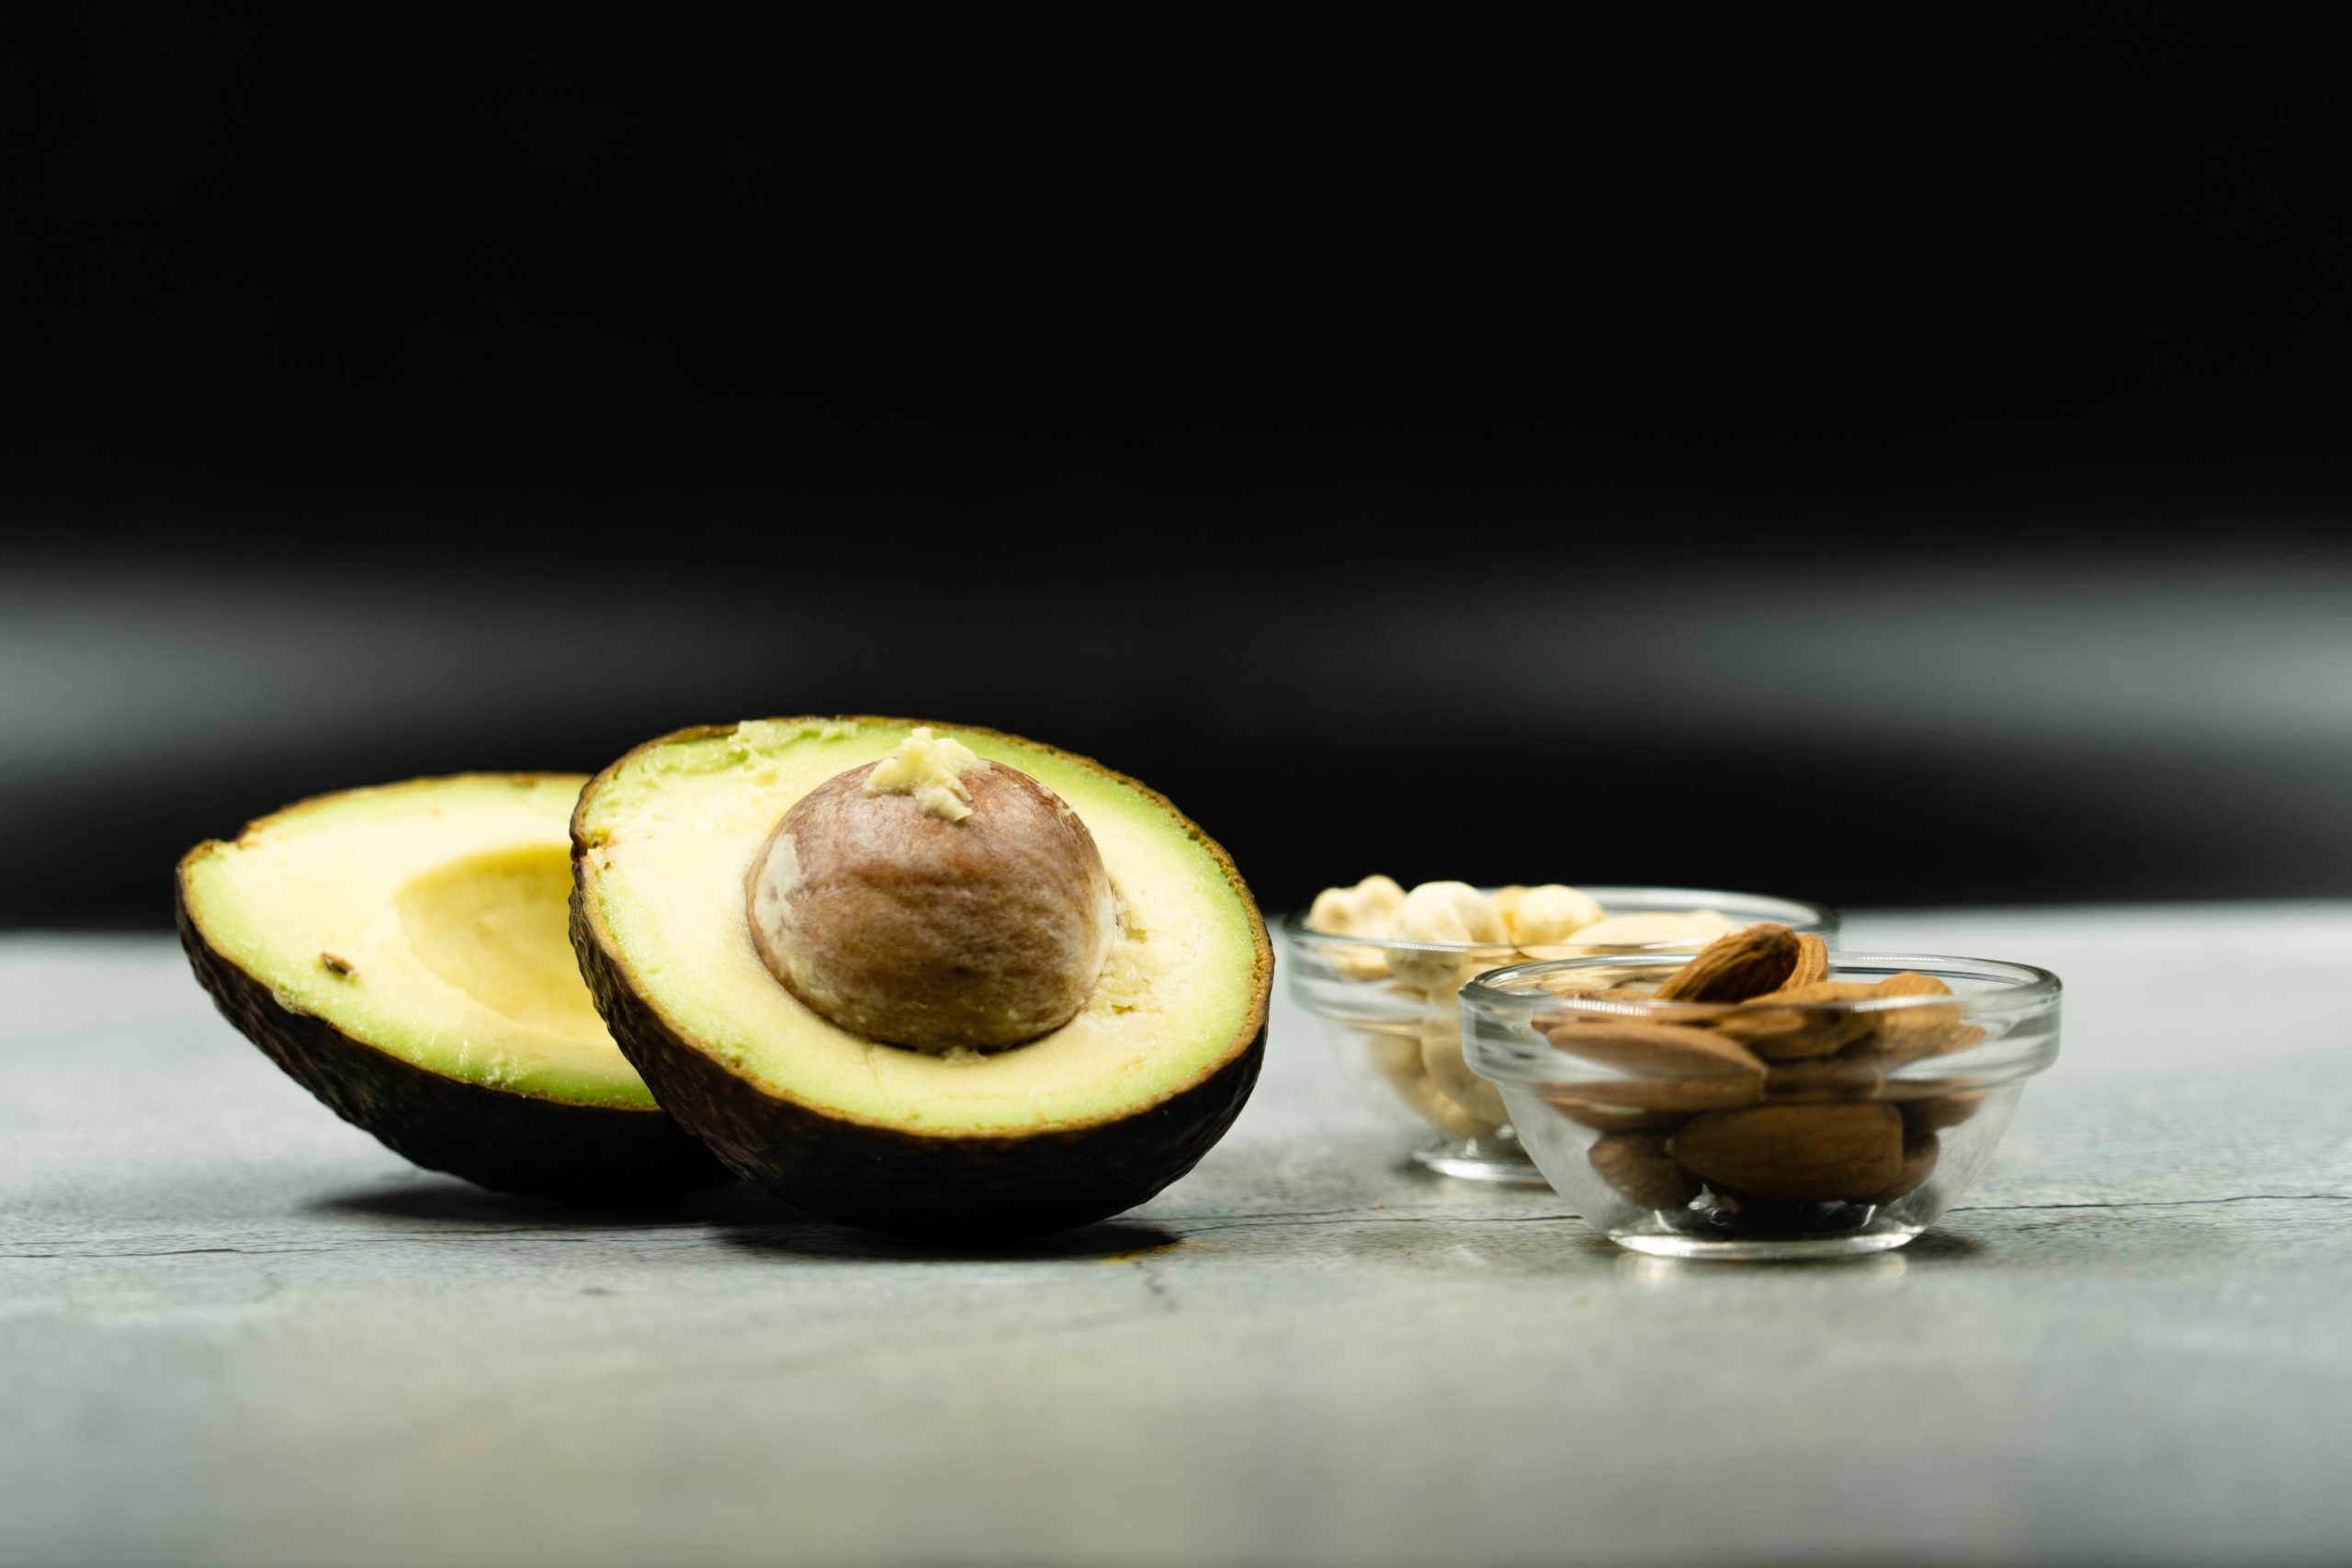 Avocado, cut in half. Bowl of nuts. On white surface with black background.